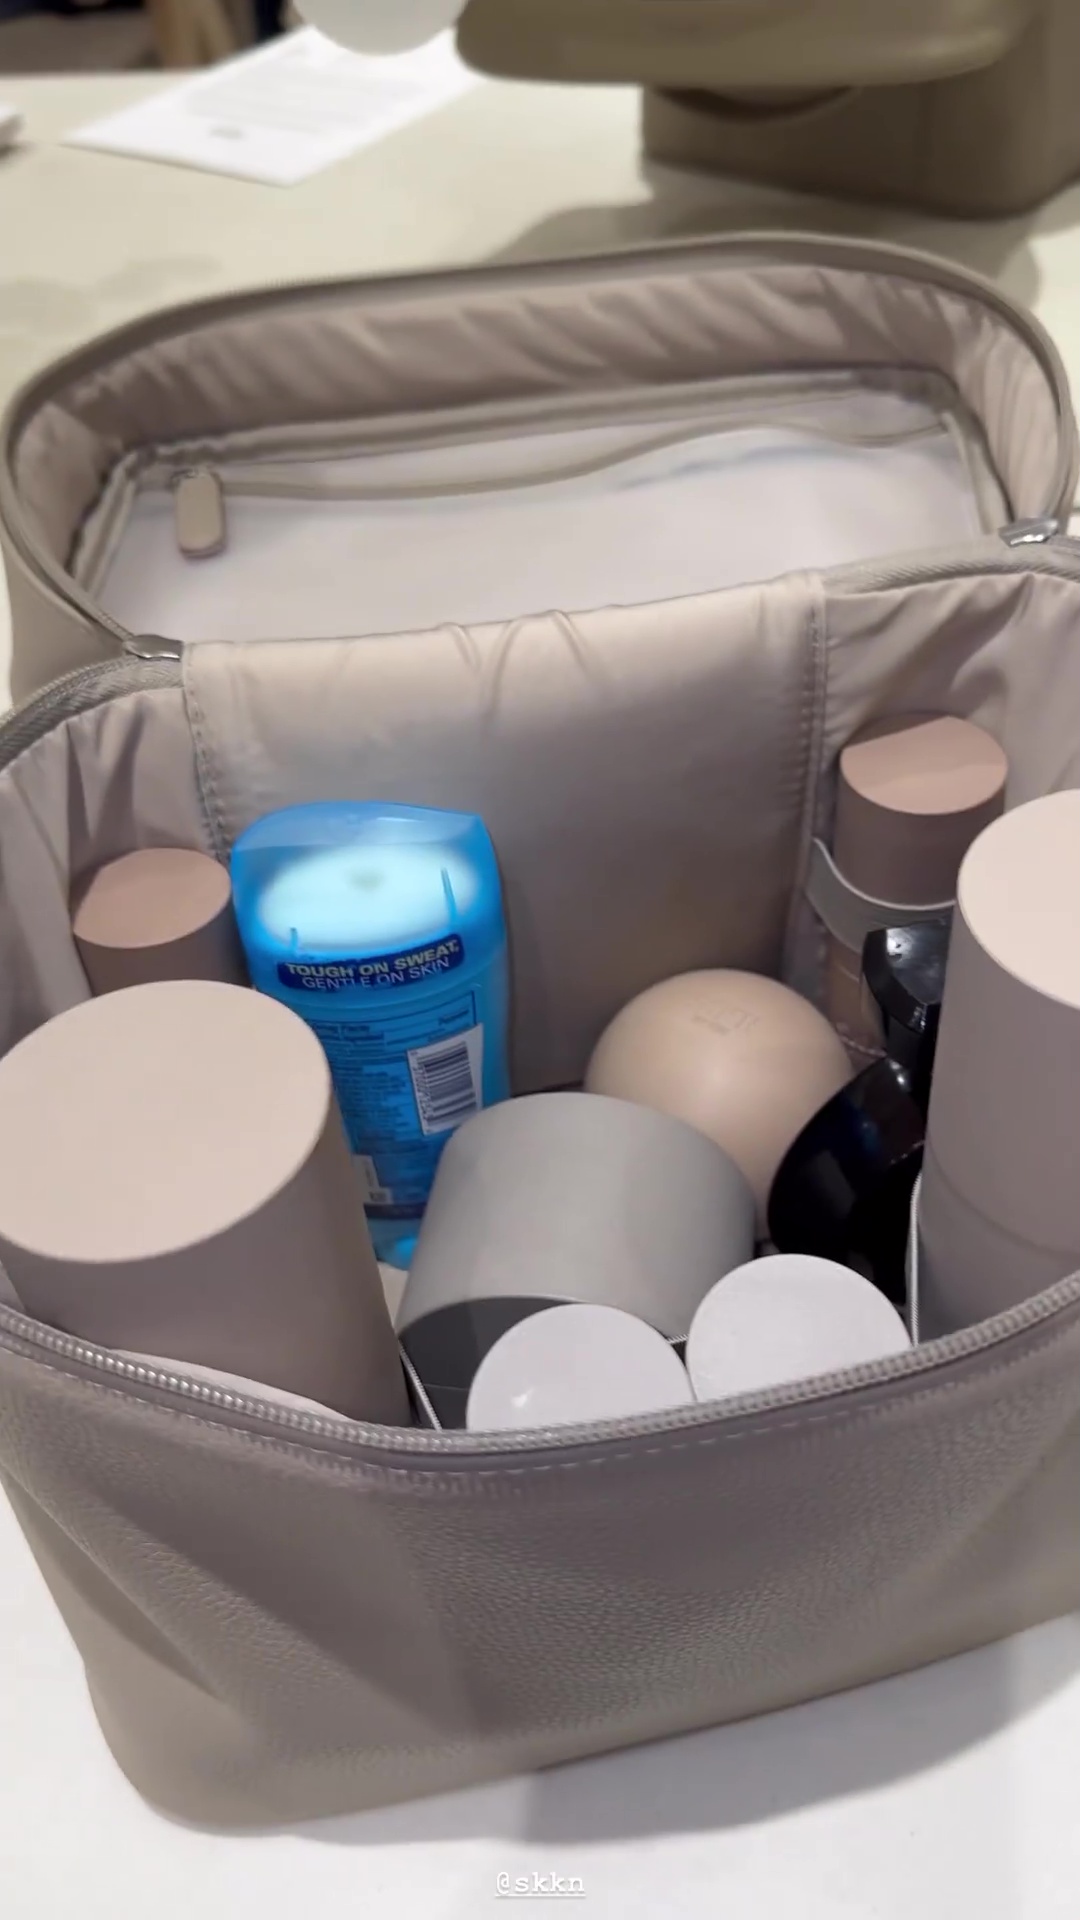 Kim Kardashian reveals what’s really in her travel toiletry bag and fans are shocked by ‘relatable’ star’s ‘cheap’ items